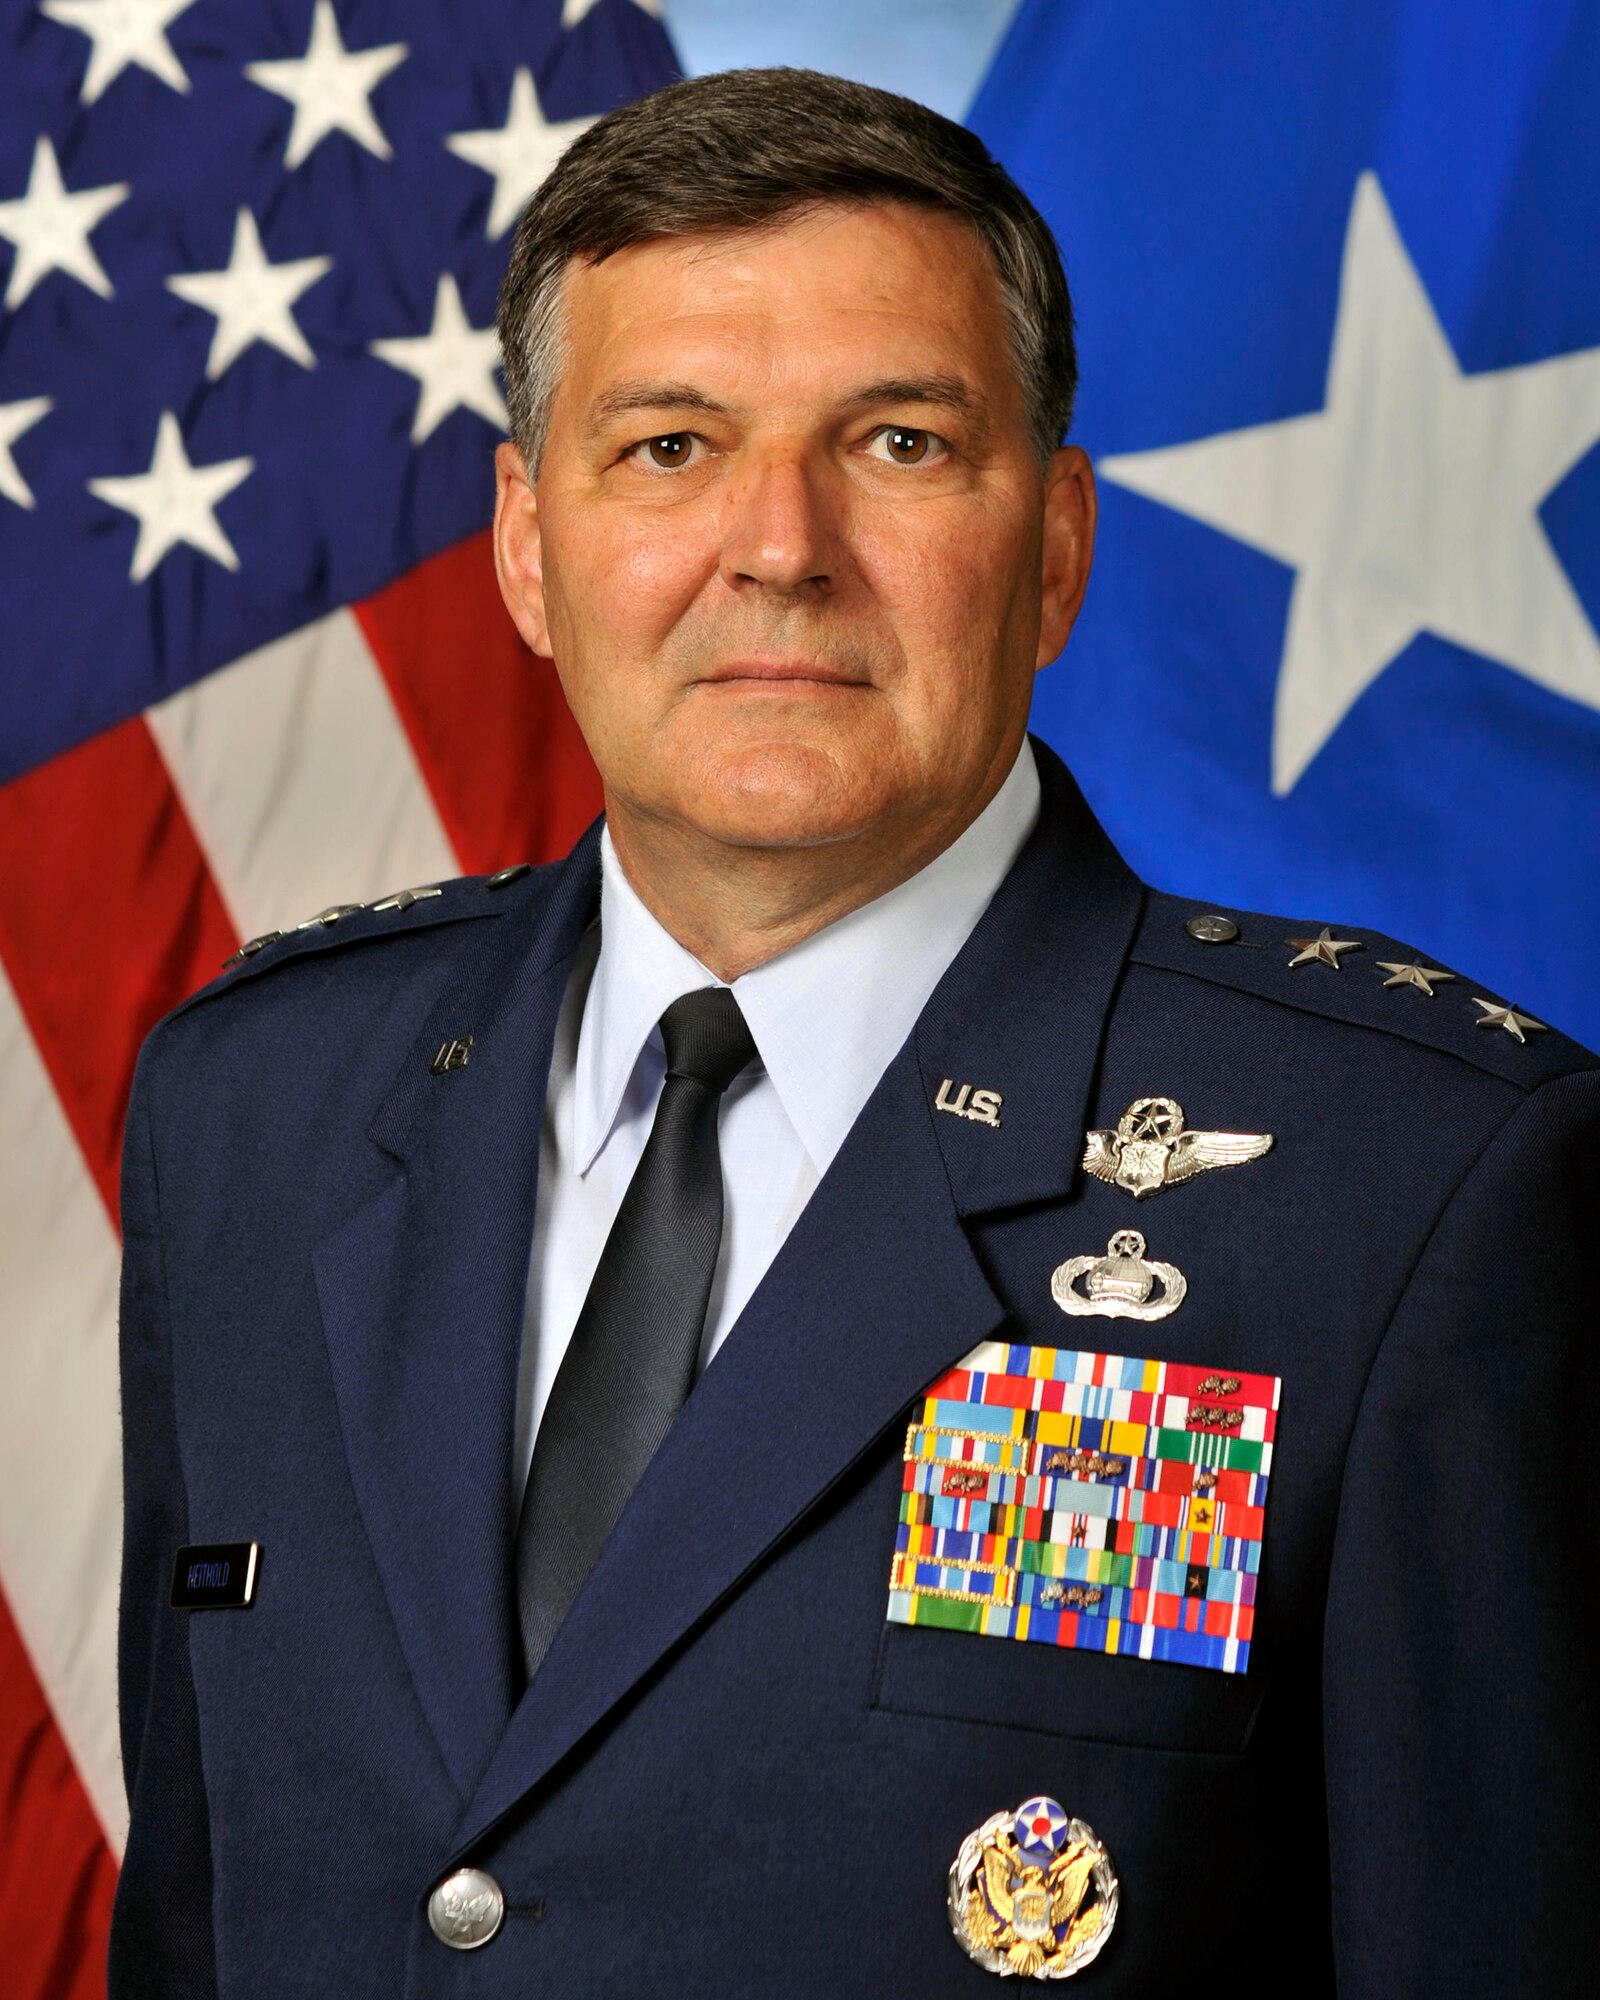 Lt. Gen. Bradley Heithold, the Air Force Special Operations Command commander (U.S. Air Force photo)